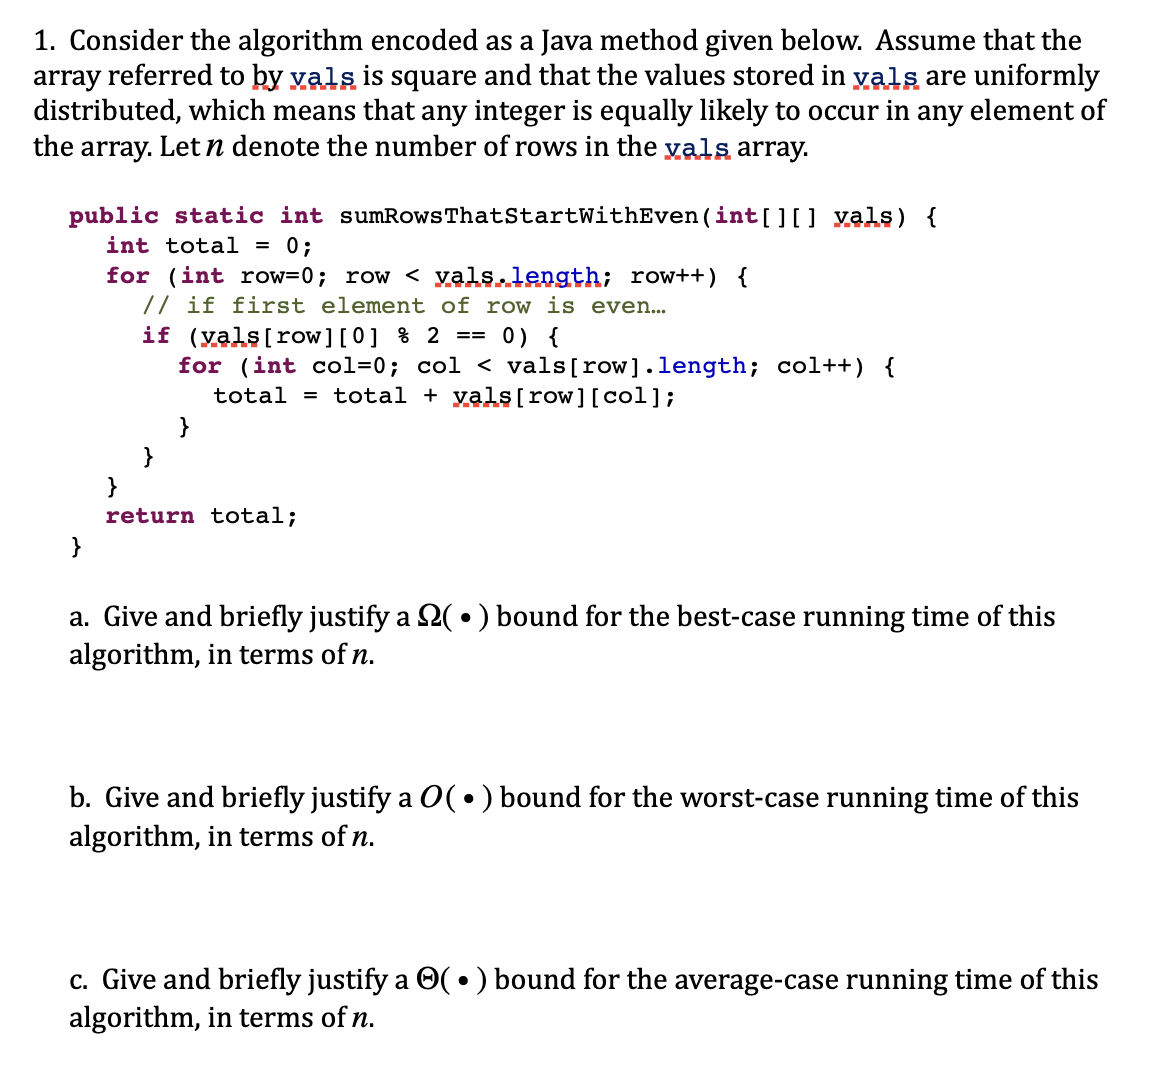 1. Consider the algorithm encoded as a Java method given below. Assume that the
array referred to by vals is square and that the values stored in vals are uniformly
distributed, which means that any integer is equally likely to occur in any element of
the array. Let n denote the number of rows in the vals array.
public static int sumRows That StartWithEven (int[][] vals) {
int total = 0;
}
for (int row=0; row < vals.length; row++) {
// if first element of row is even...
if (vals [row][0] % 2
== 0) {
for (int col=0; col < vals[row].length; col++) {
total = total + vals[row][col];
}
return total;
a. Give and briefly justify a (•) bound for the best-case running time of this
algorithm, in terms of n.
b. Give and briefly justify a O(•) bound for the worst-case running time of this
algorithm, in terms of n.
c. Give and briefly justify a ✪( • ) bound for the average-case running time of this
algorithm, in terms of n.